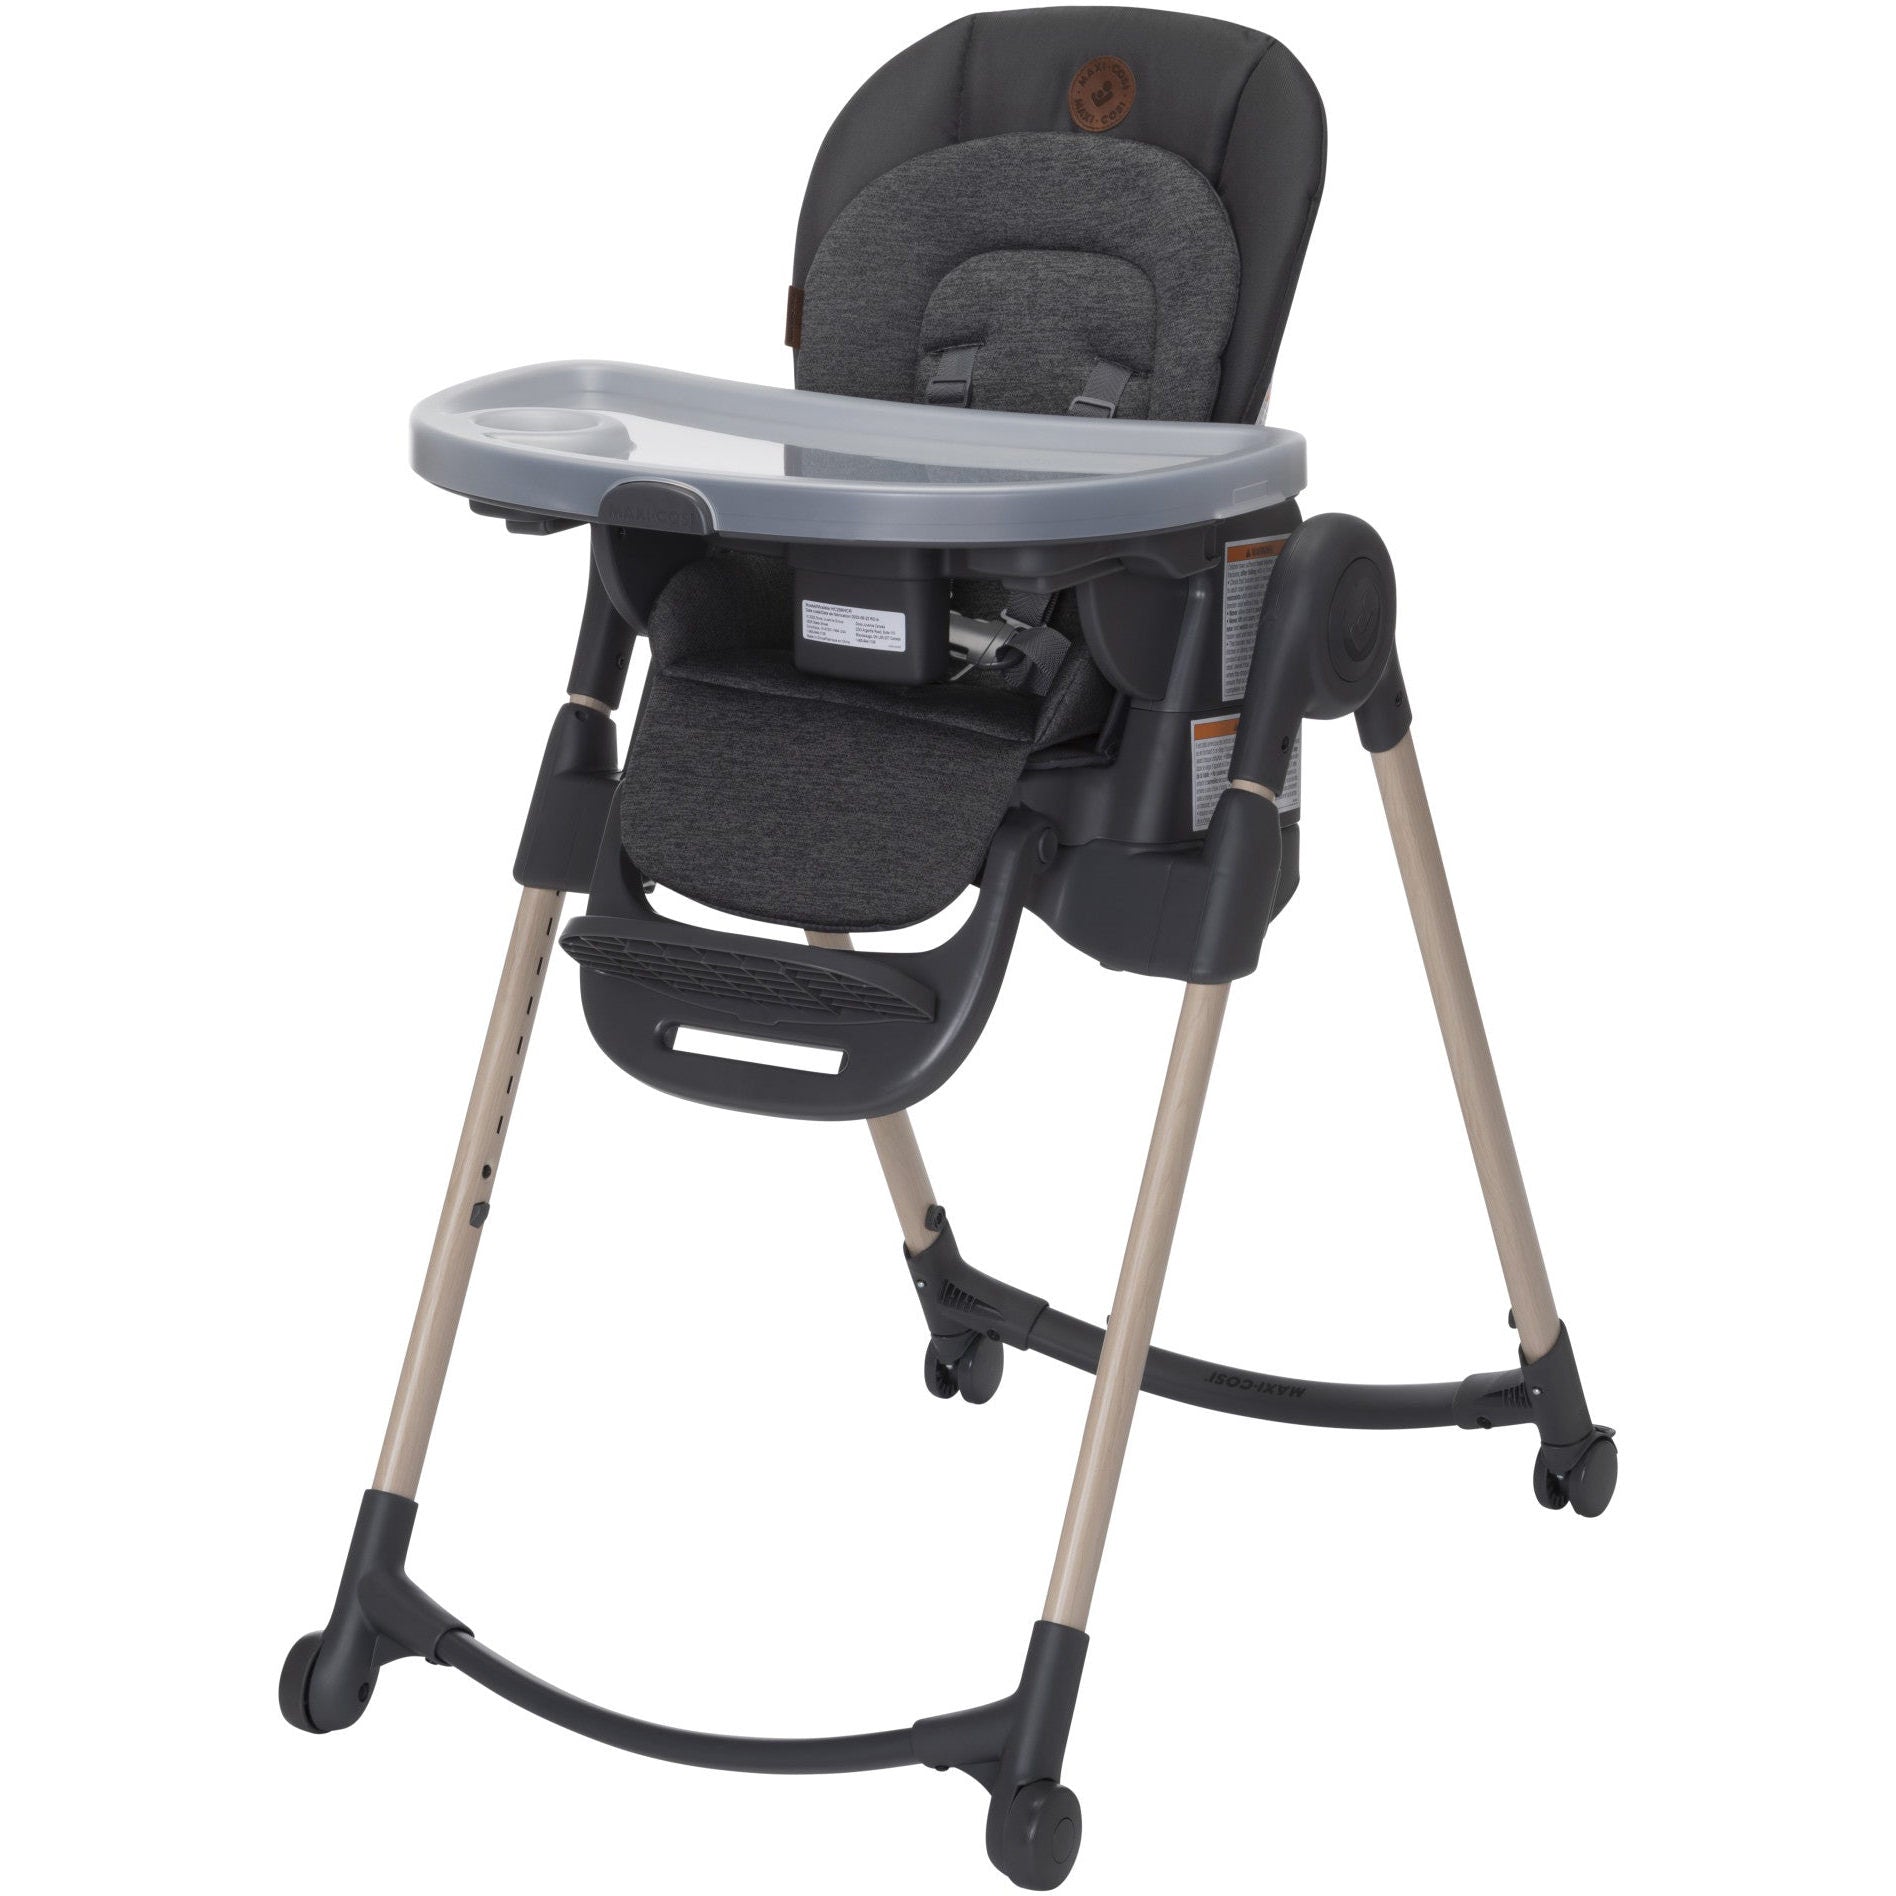 Maxi-Cosi Minla 6-in-1 Adjustable High Chair - Twinkle Twinkle Little One